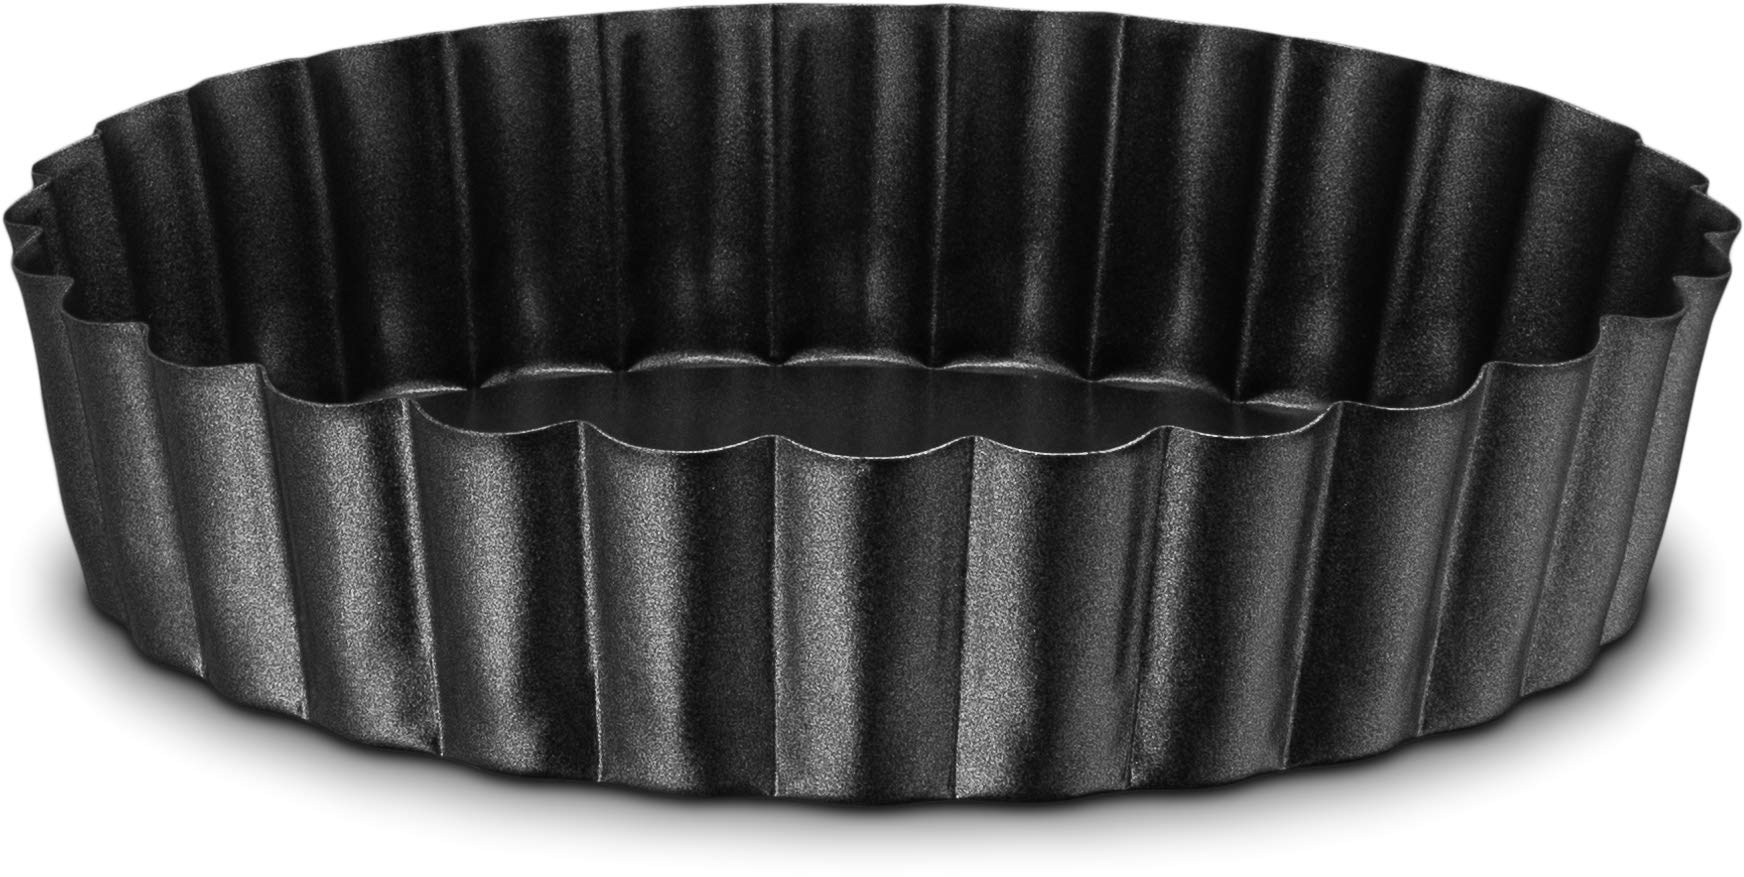 Gourmia GPA9375 Mini Tart Pans with Removable Bottom - 6 Pack, 5� Diameter, 1� Depth � 100% PFOA free Non Stick Carbon Steel - Miniature Molds For Pies, Cheese Cakes, Desserts, Quiche pan and More  - Like New